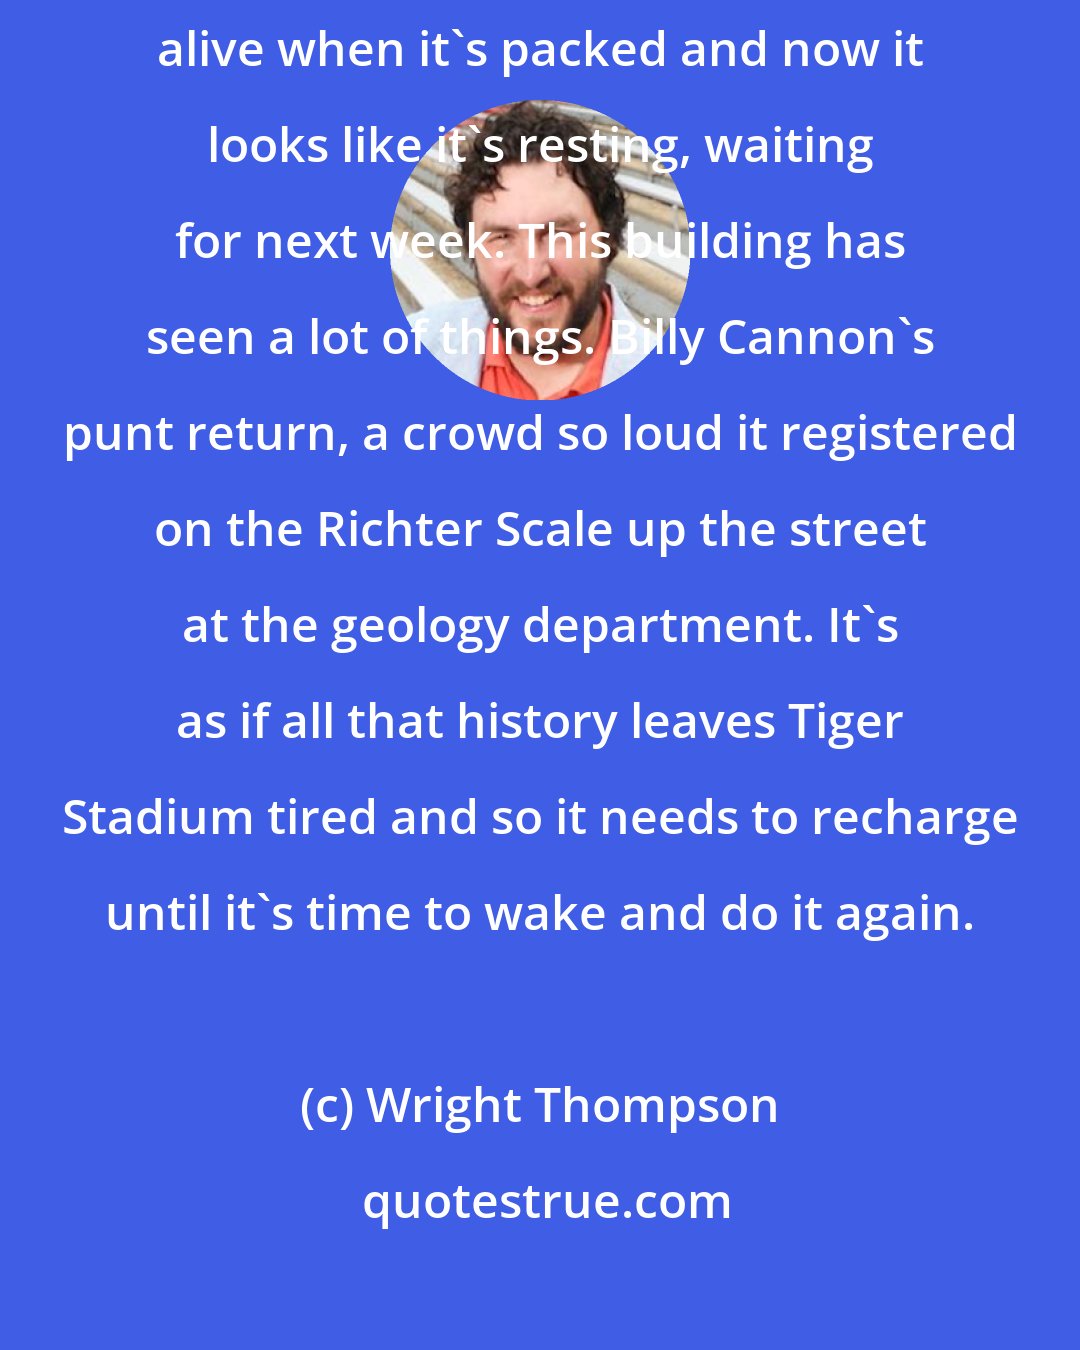 Wright Thompson: I've always loved empty stadiums, none more than this one. It feels alive when it's packed and now it looks like it's resting, waiting for next week. This building has seen a lot of things. Billy Cannon's punt return, a crowd so loud it registered on the Richter Scale up the street at the geology department. It's as if all that history leaves Tiger Stadium tired and so it needs to recharge until it's time to wake and do it again.